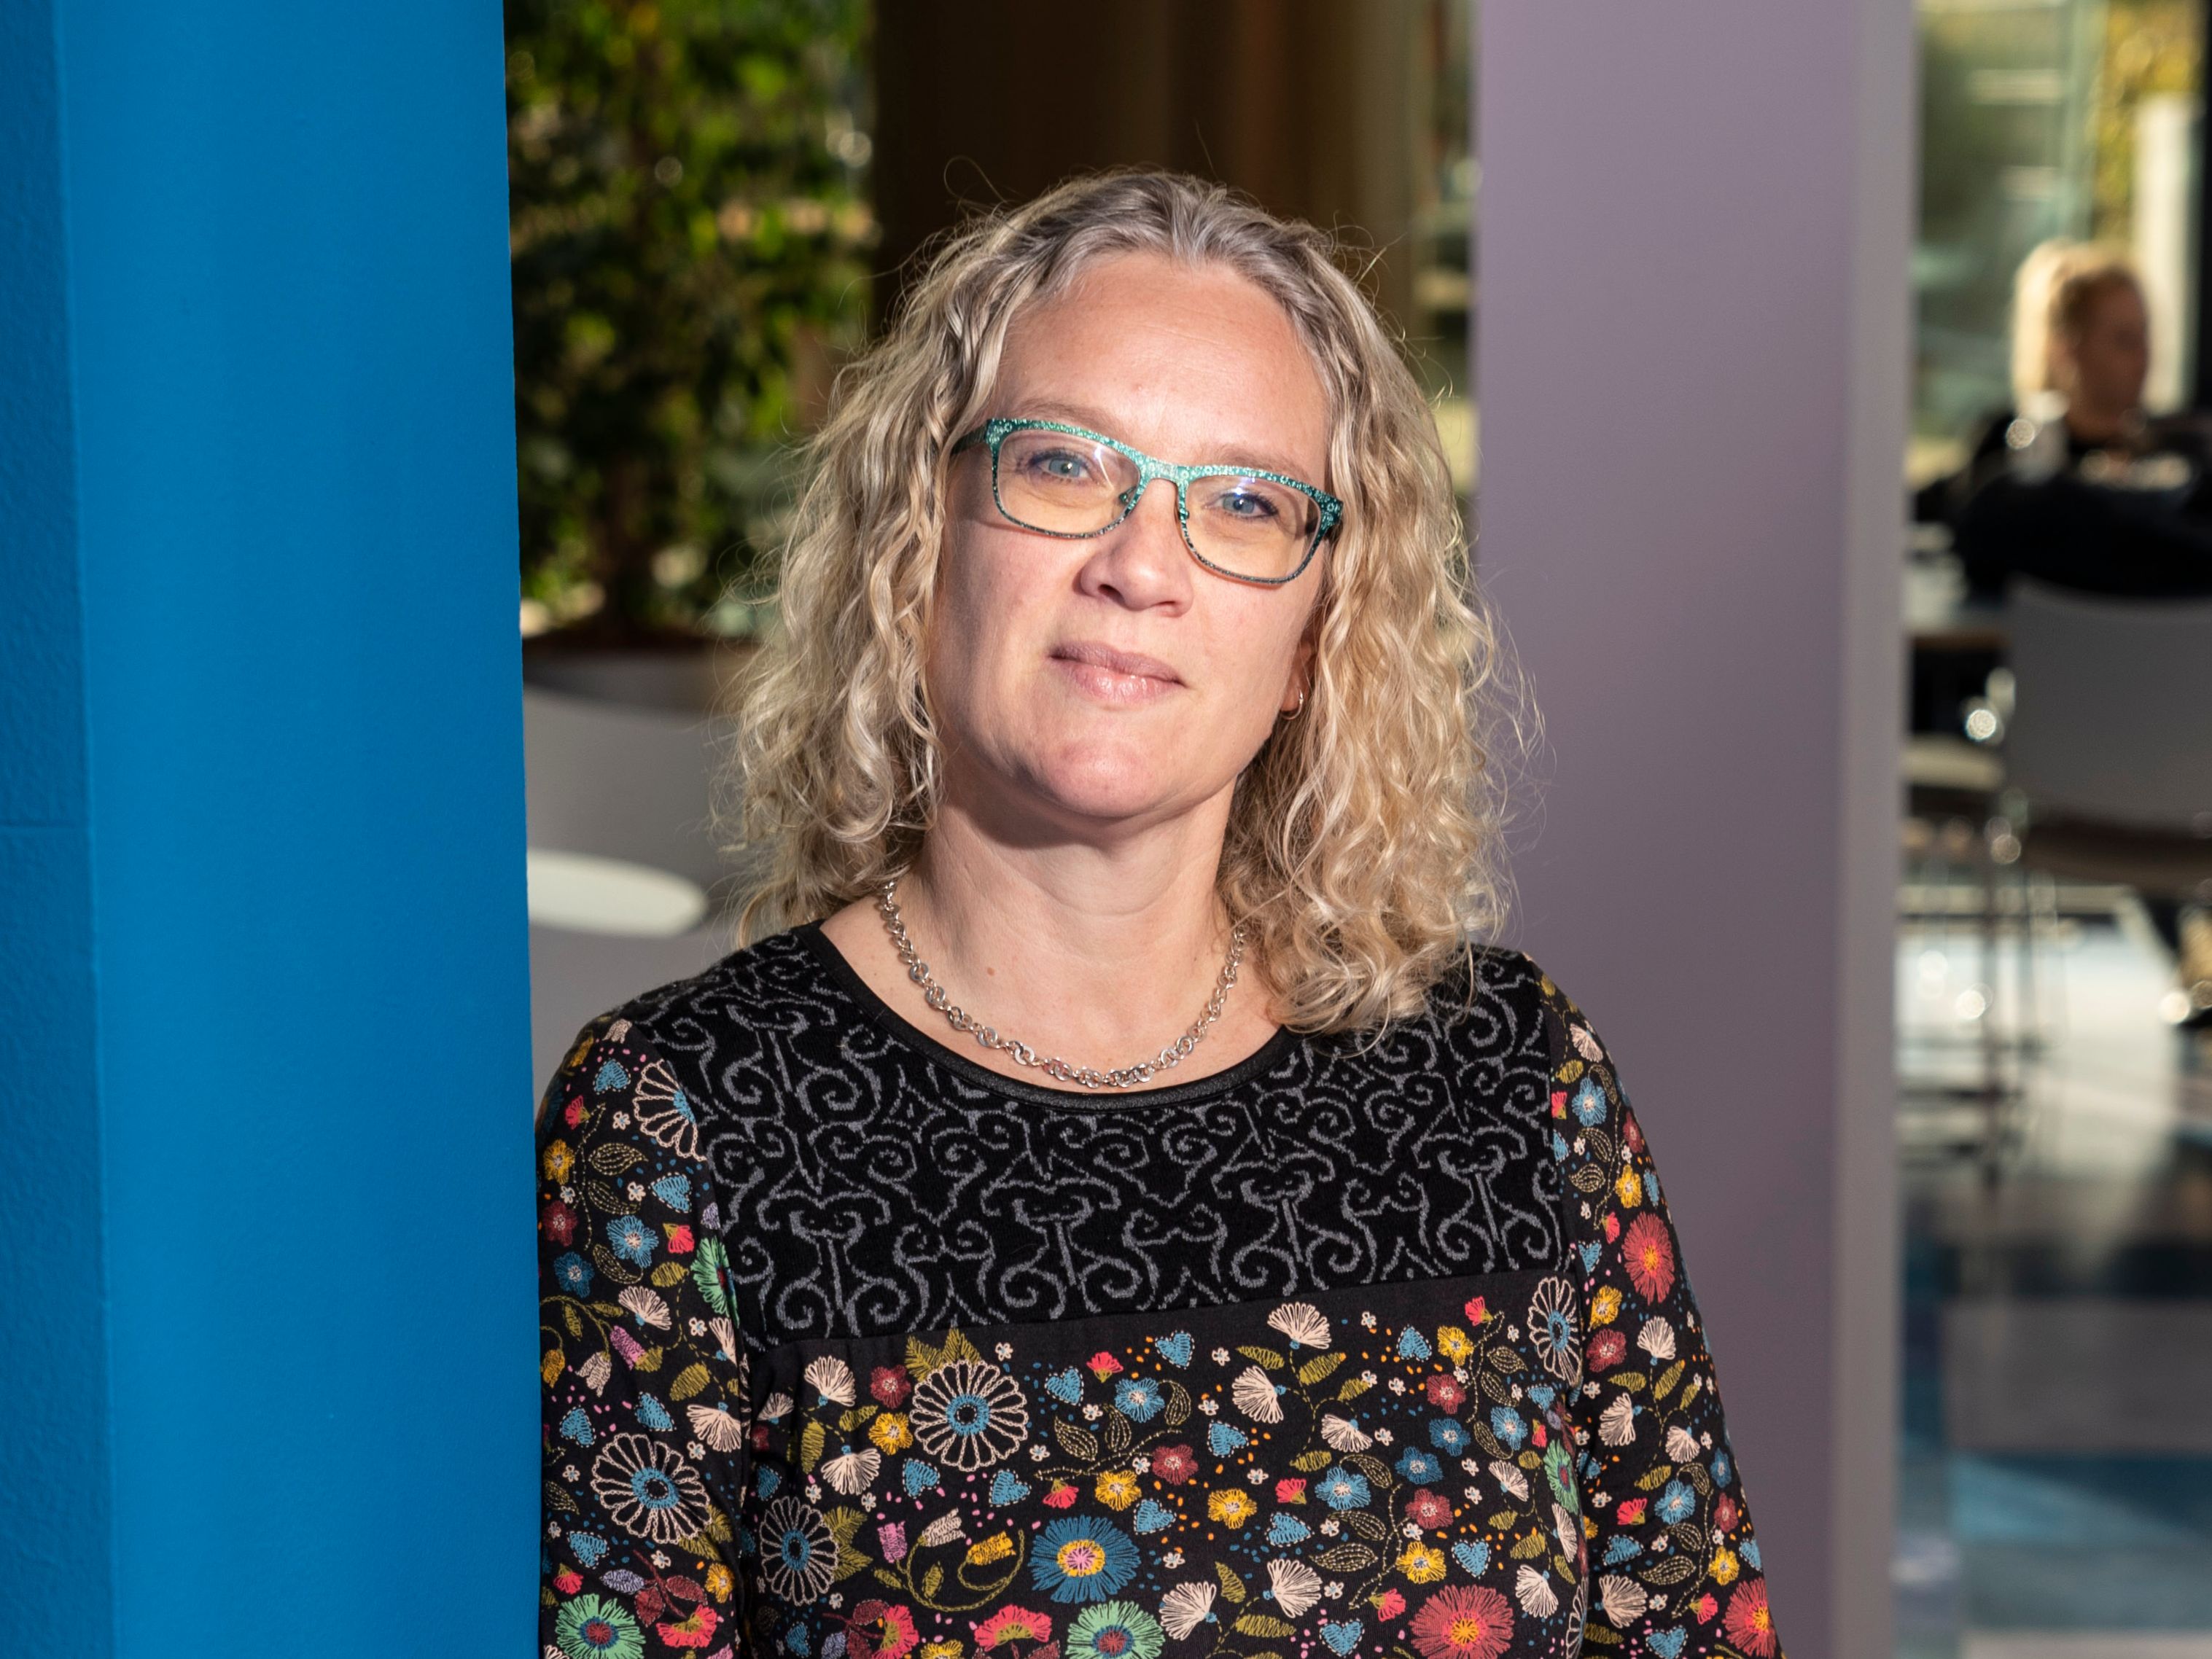 Associate Professor Rian Drogendijk's specialisations include internationalisation of firms, organisation of multinational corporations, cross cultural management, and measures of cultural distance or differences.